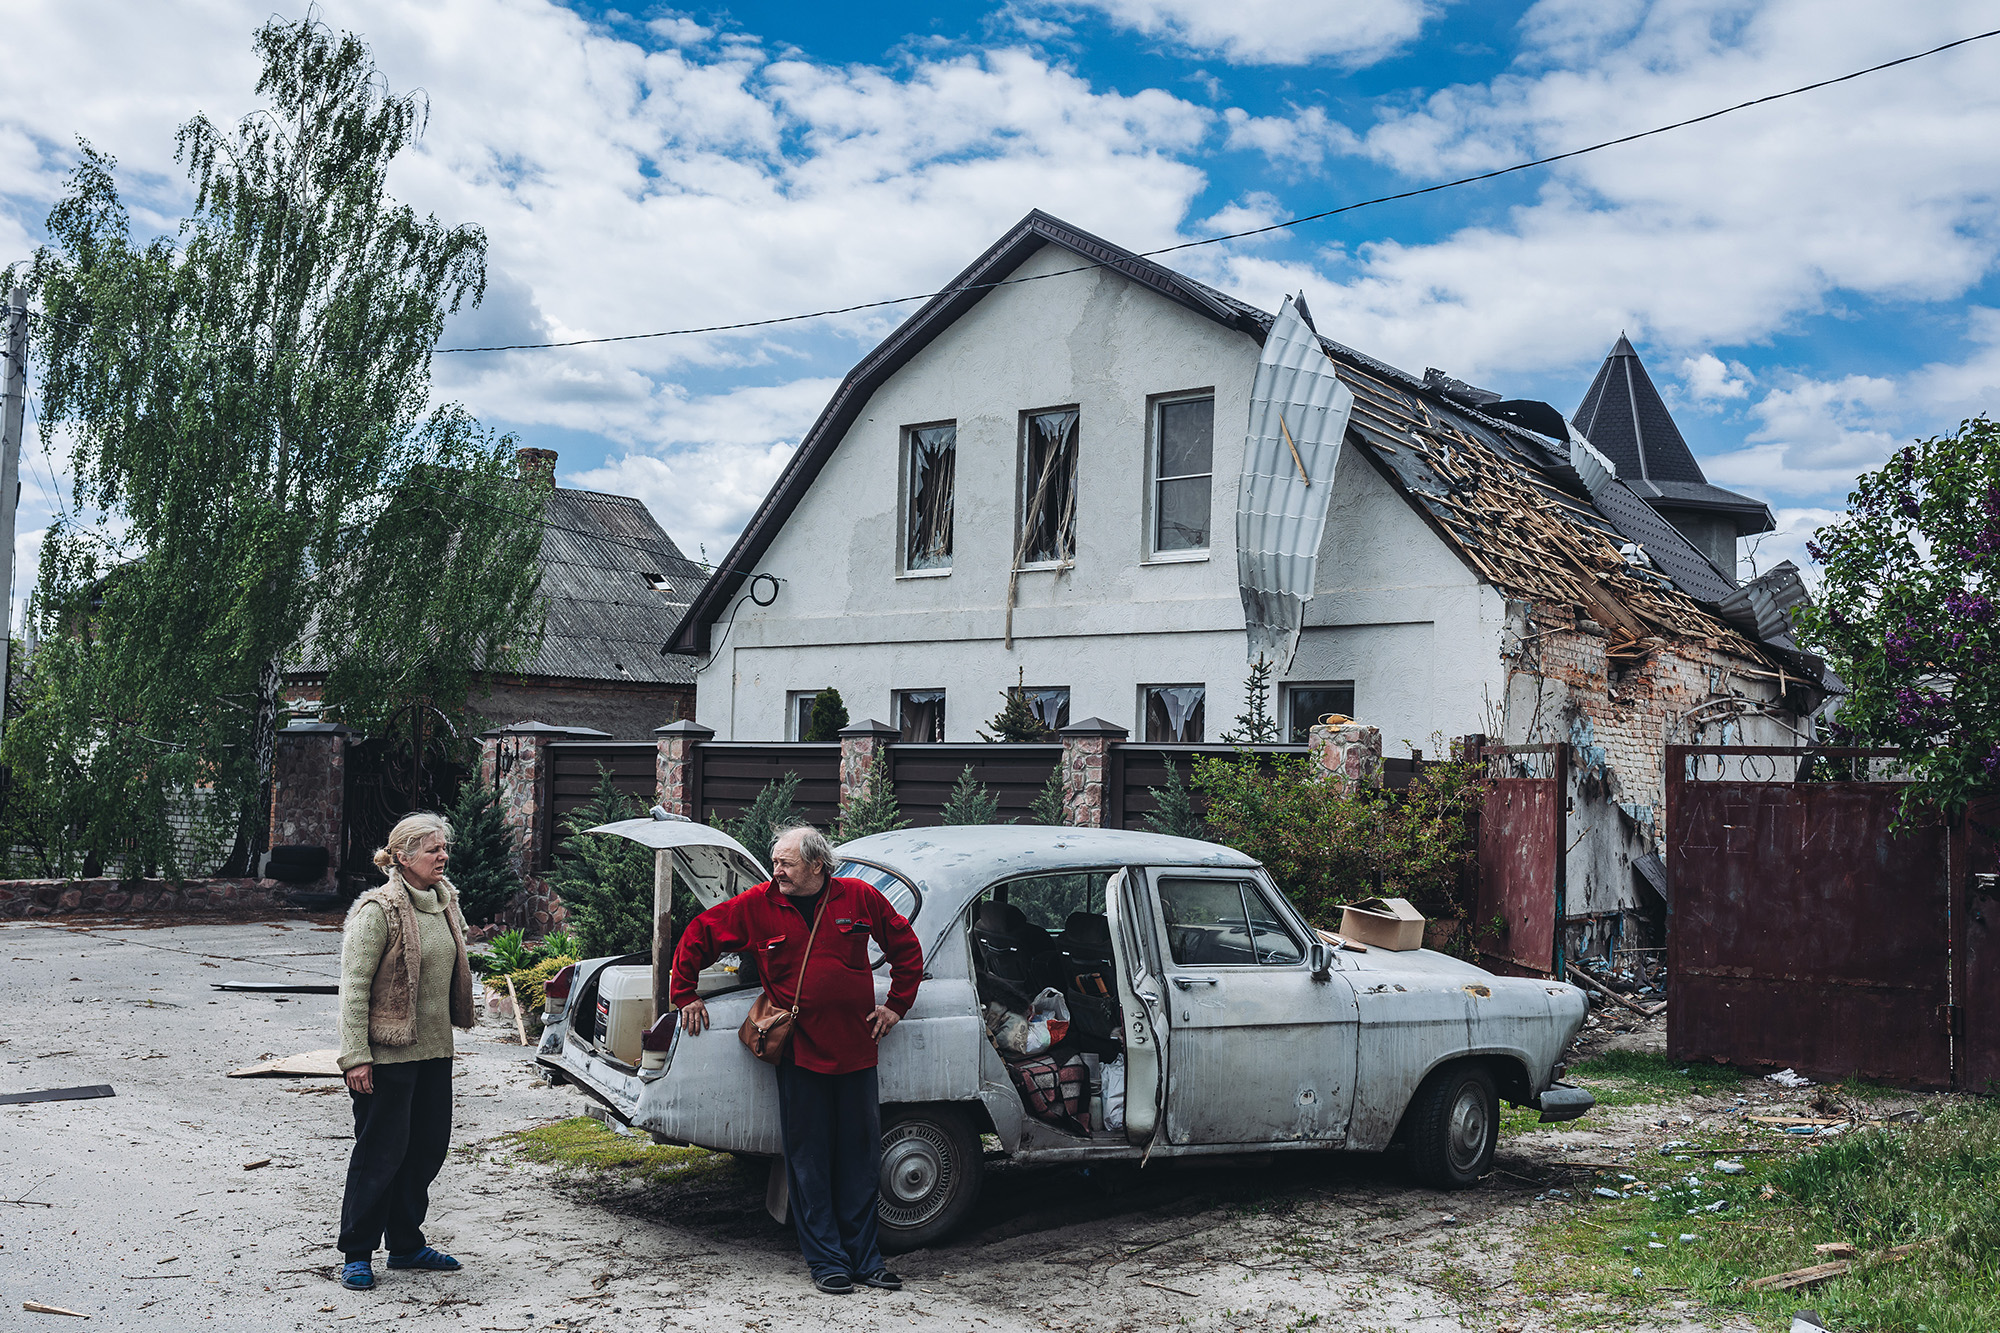  A couple in front of a house damaged by shelling on the outskirts of Kharkiv, Ukraine, on May 10.